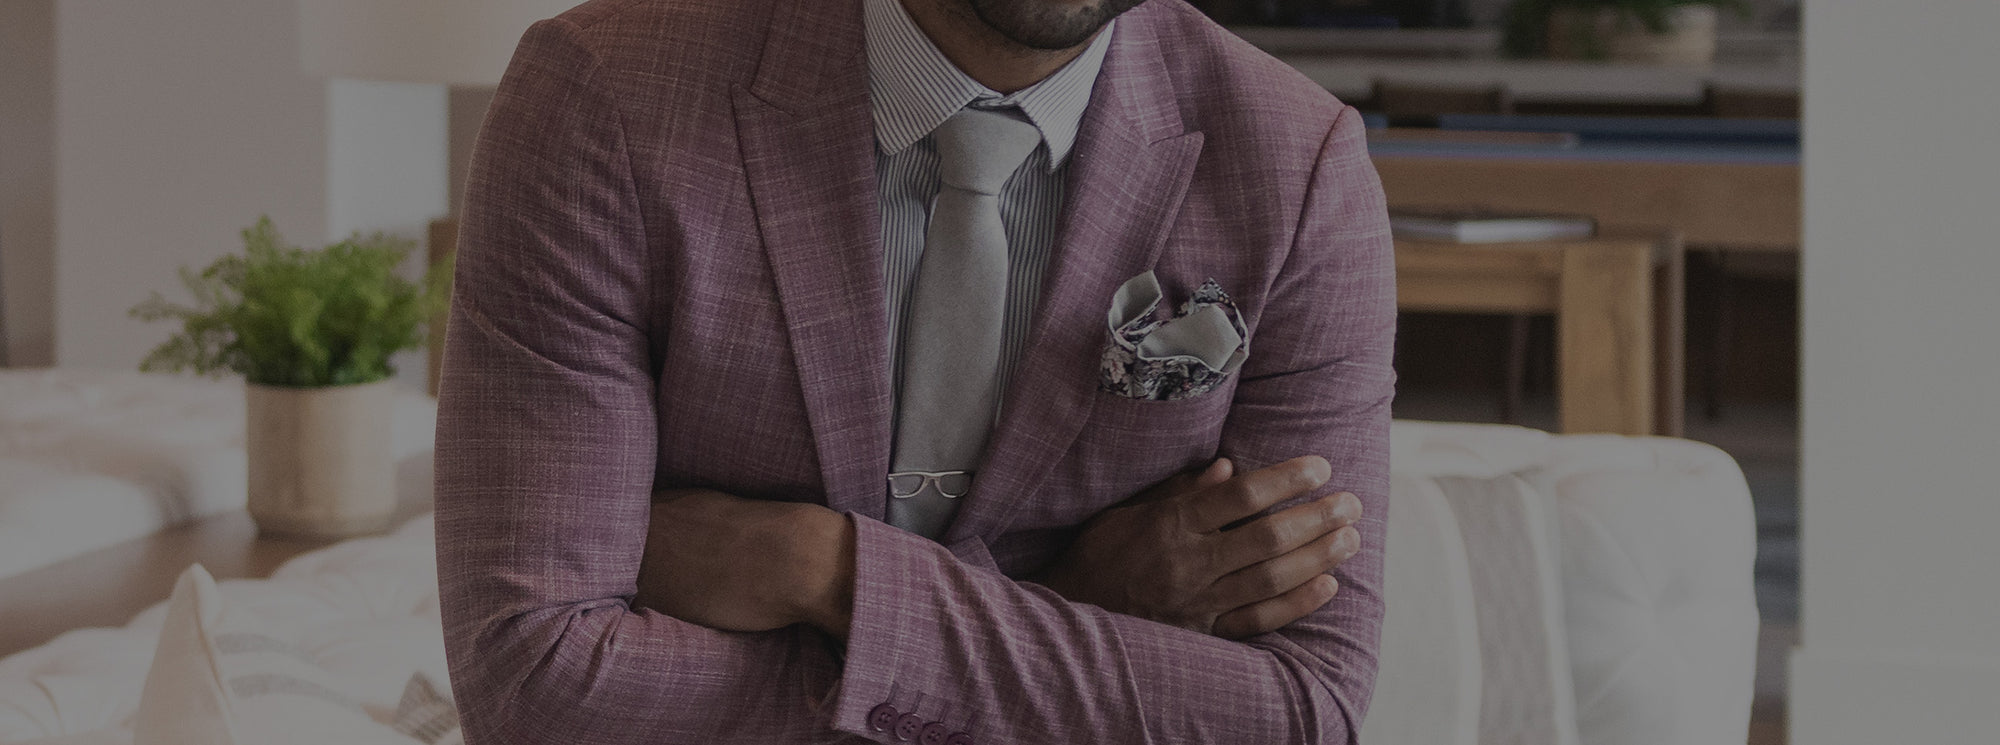 Man wearing a grey tie and a lavender suit